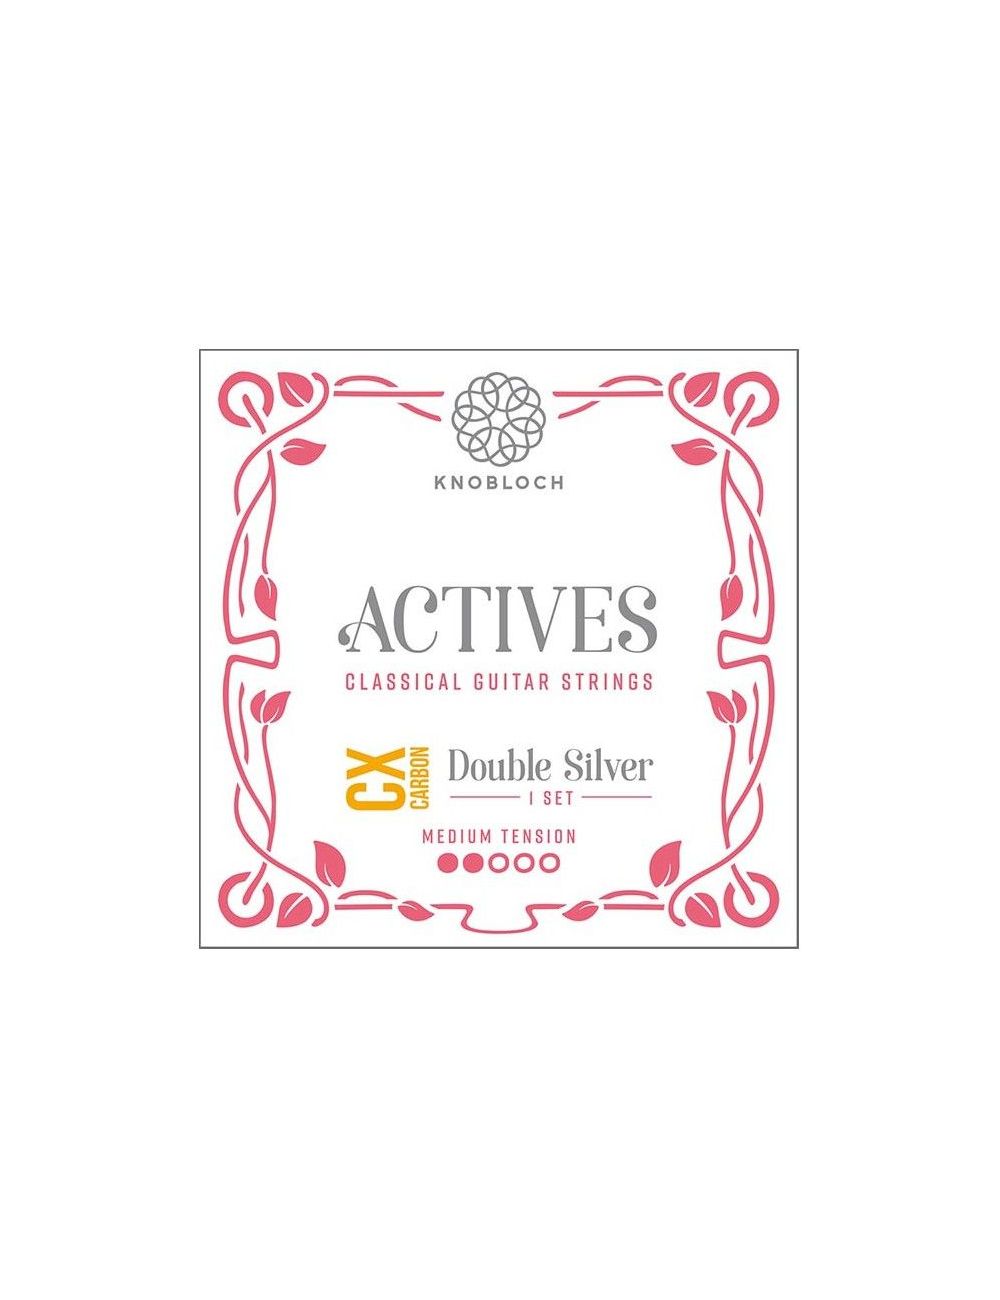 Knobloch Actives Double Silver Carbon CX 300ADC Medium Tension Strings CX 300ADC Guitar strings